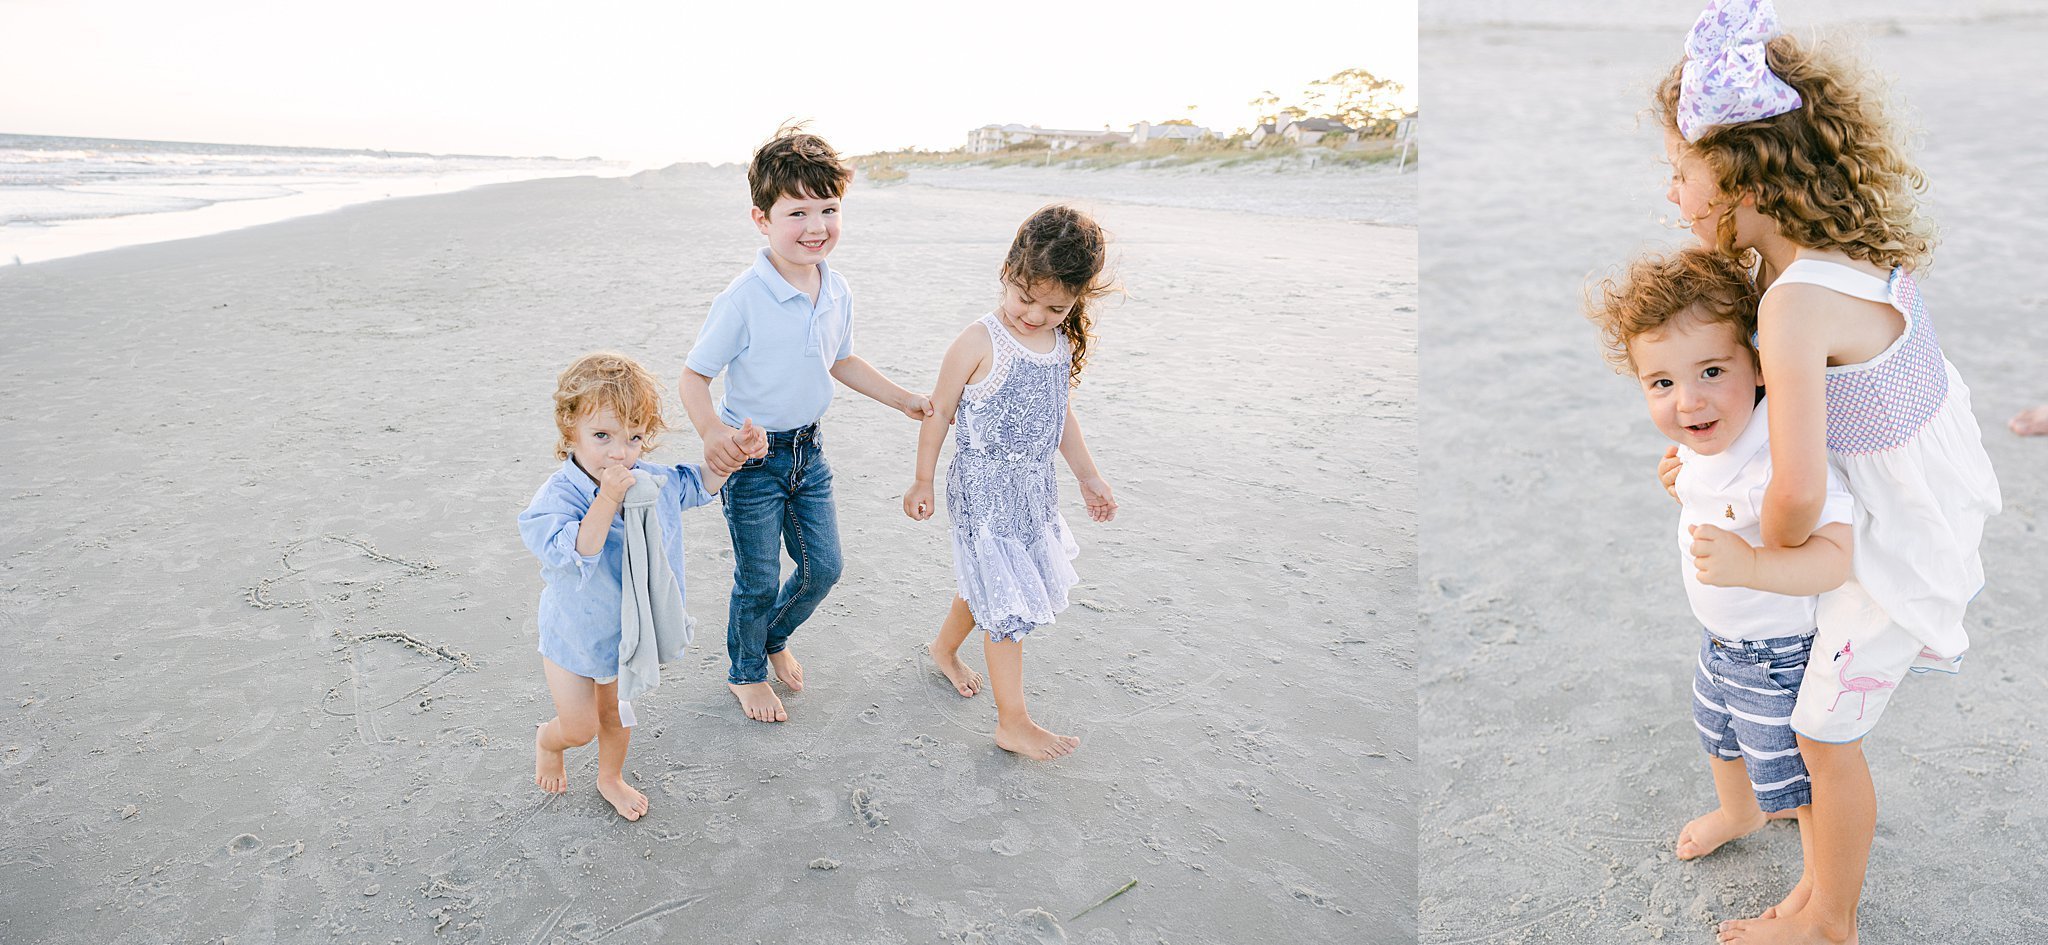 Katherine_Ives_Photography_Chod_Hilton_Head_Extended_Family_Session_119.JPG